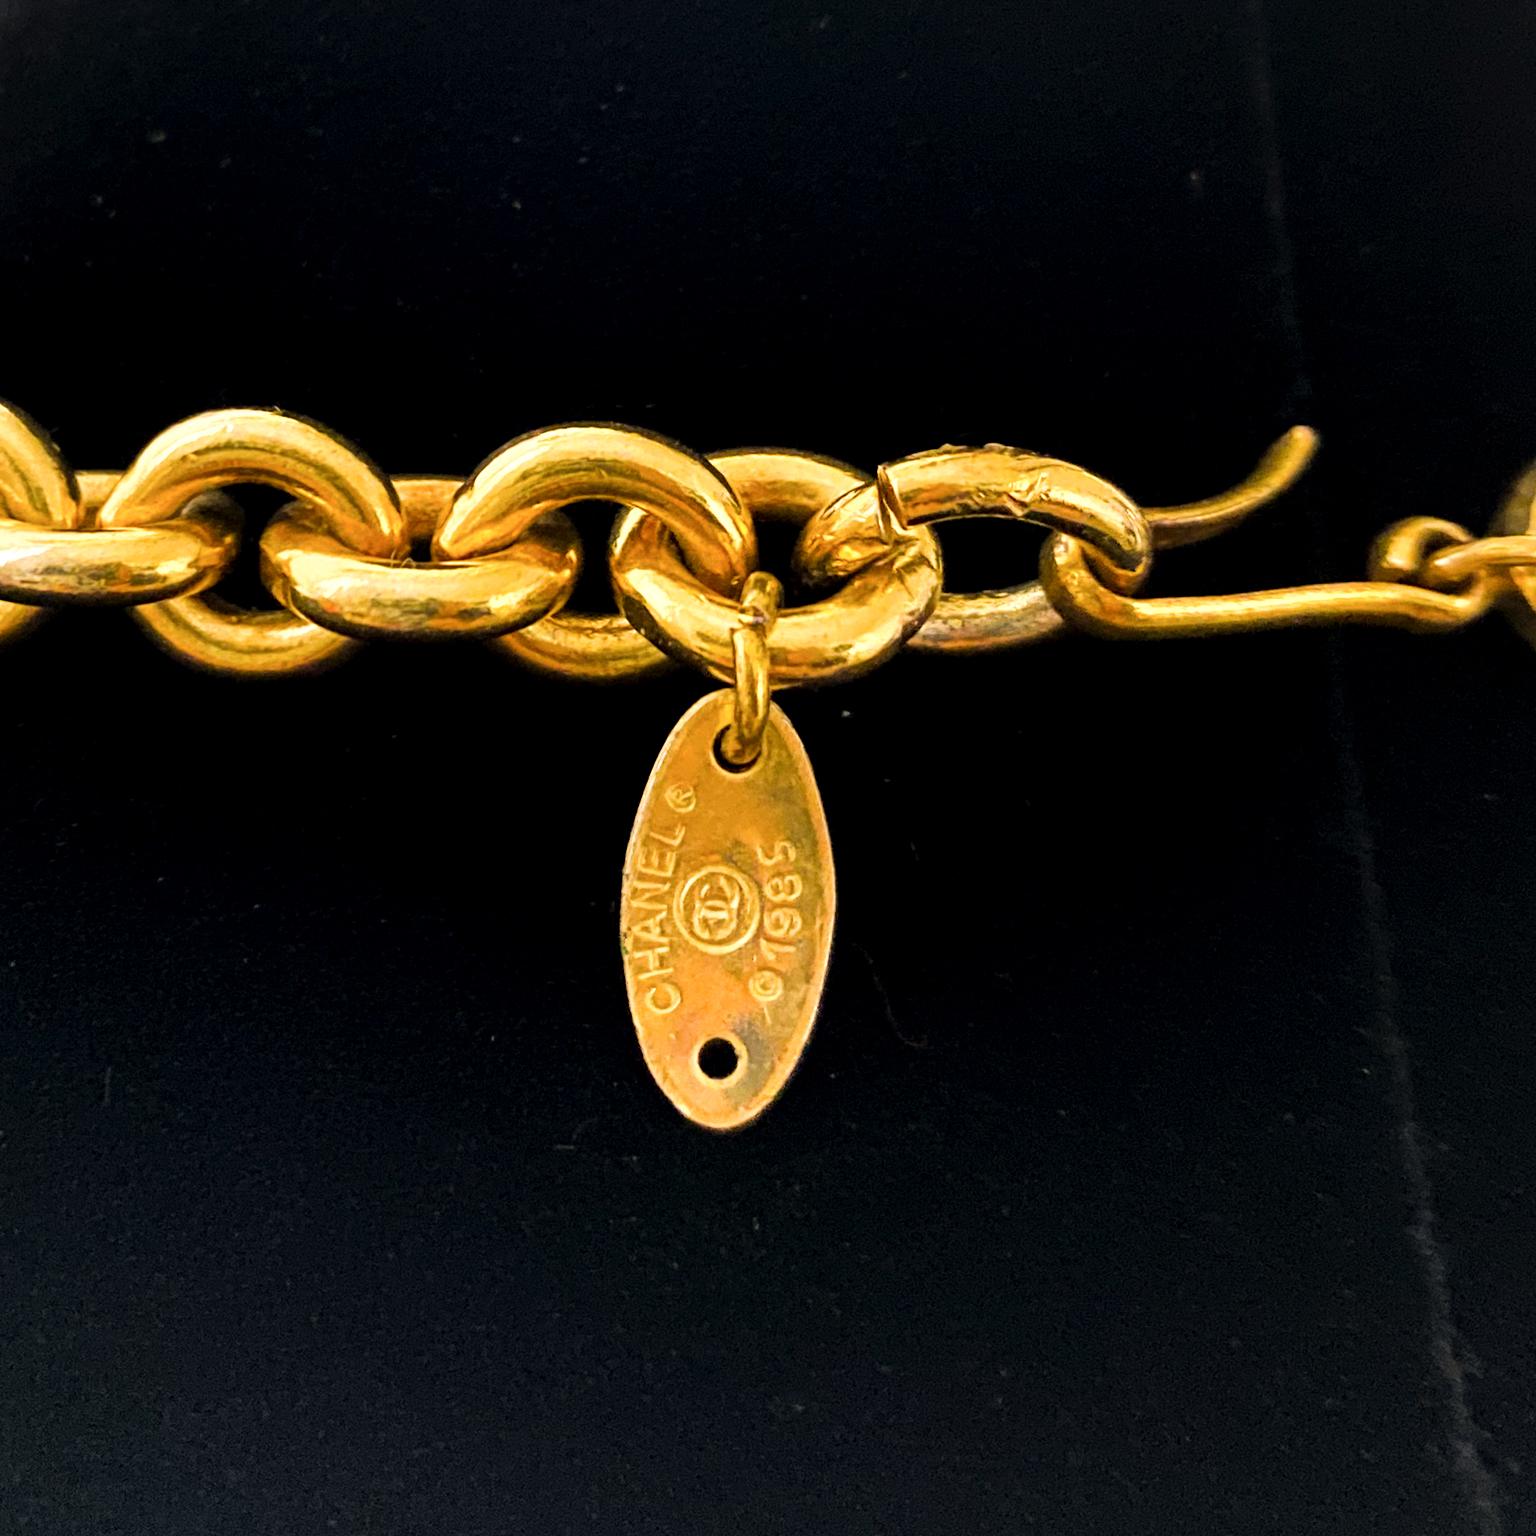 1985 Chanel Gold Tone Chain Link Necklace with Gilded Beads  In Good Condition For Sale In Toronto, Ontario